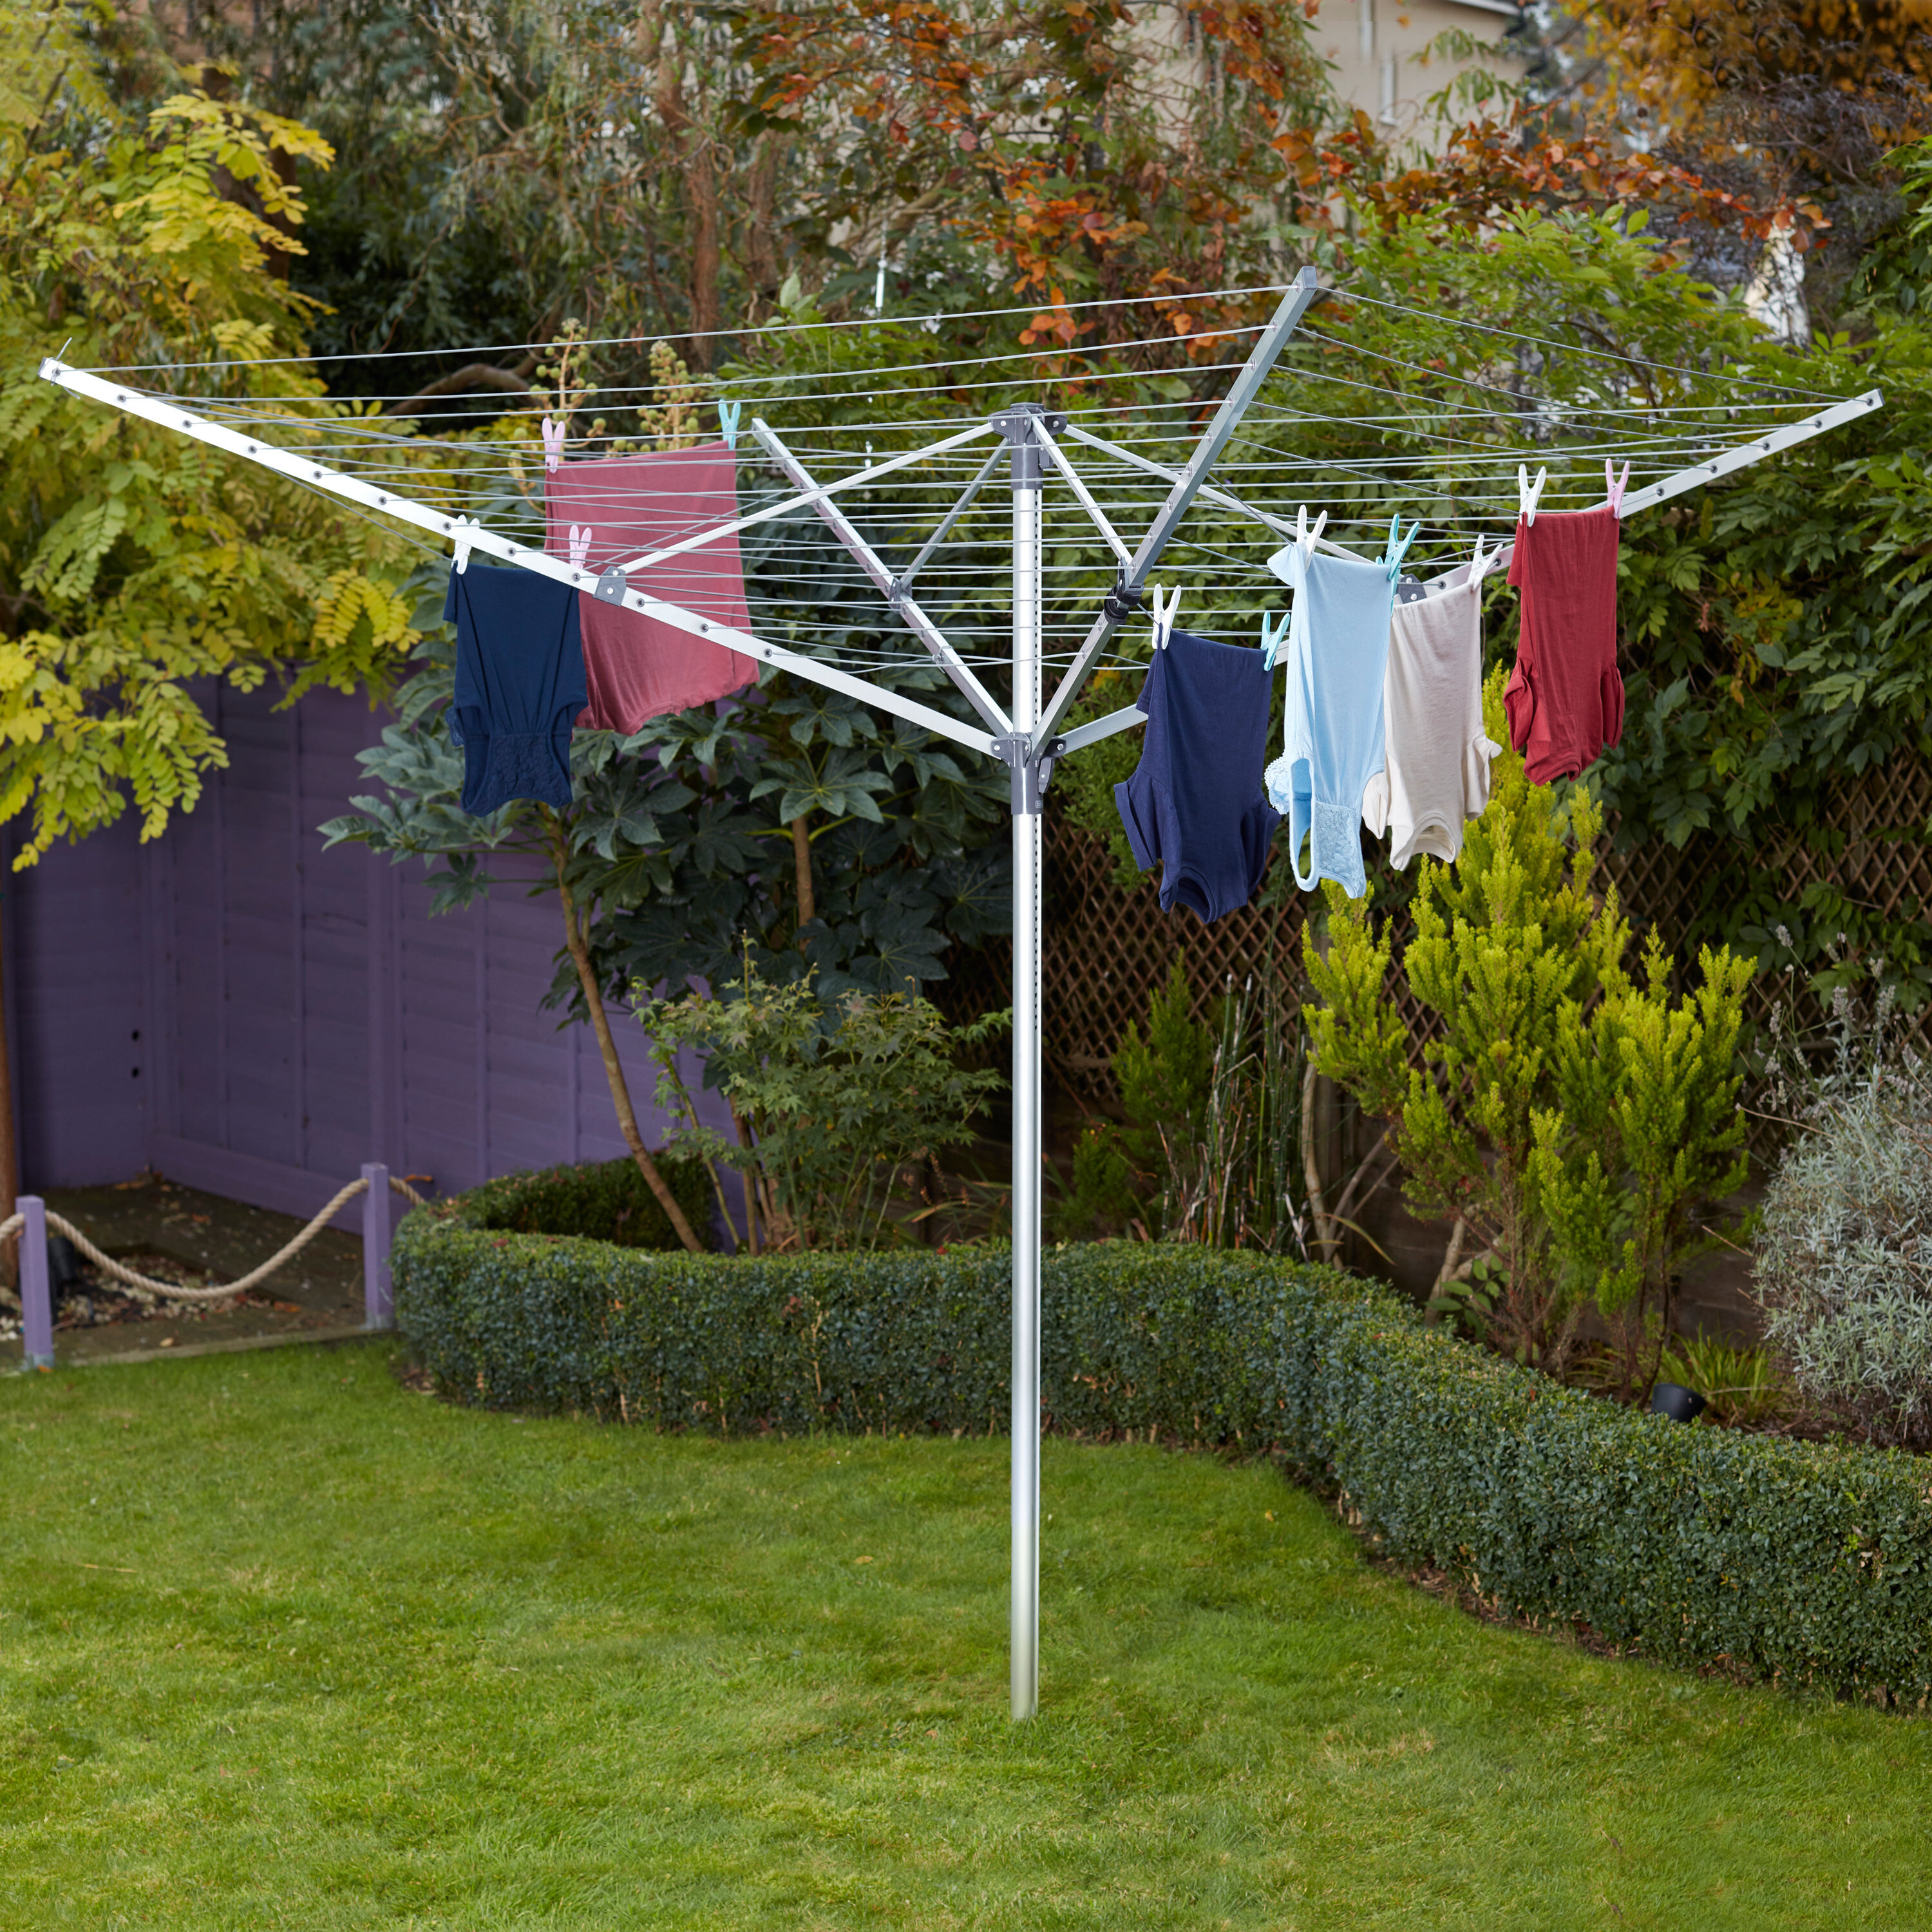 UK Stock 4-Arm Rotary Airer 40M Washing Line Folding Outdoor Clothes Dryer Light Weight with Ground Spike